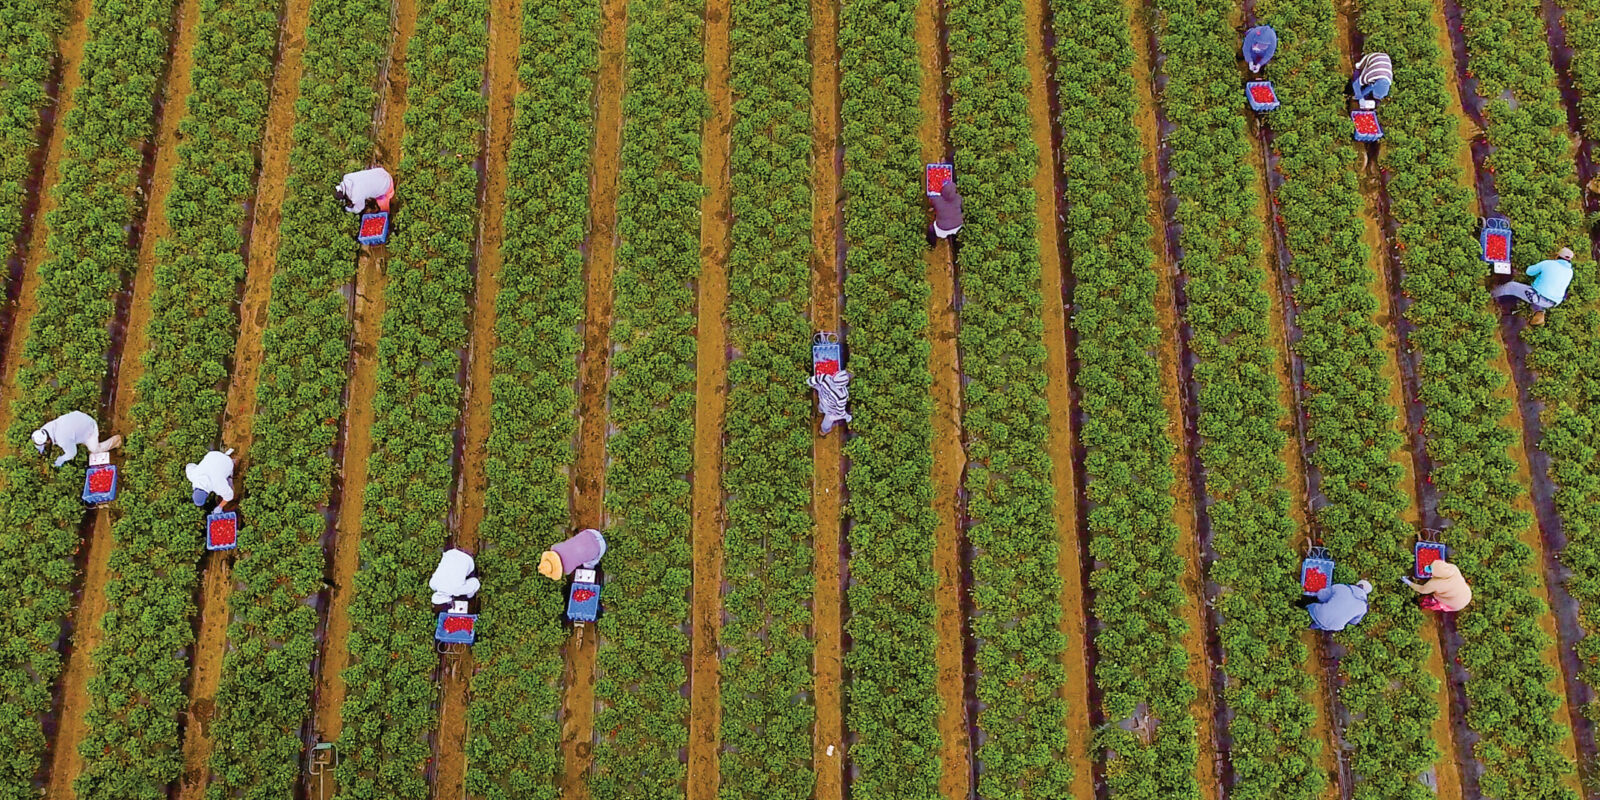 Overhead view of farmworkers in a field